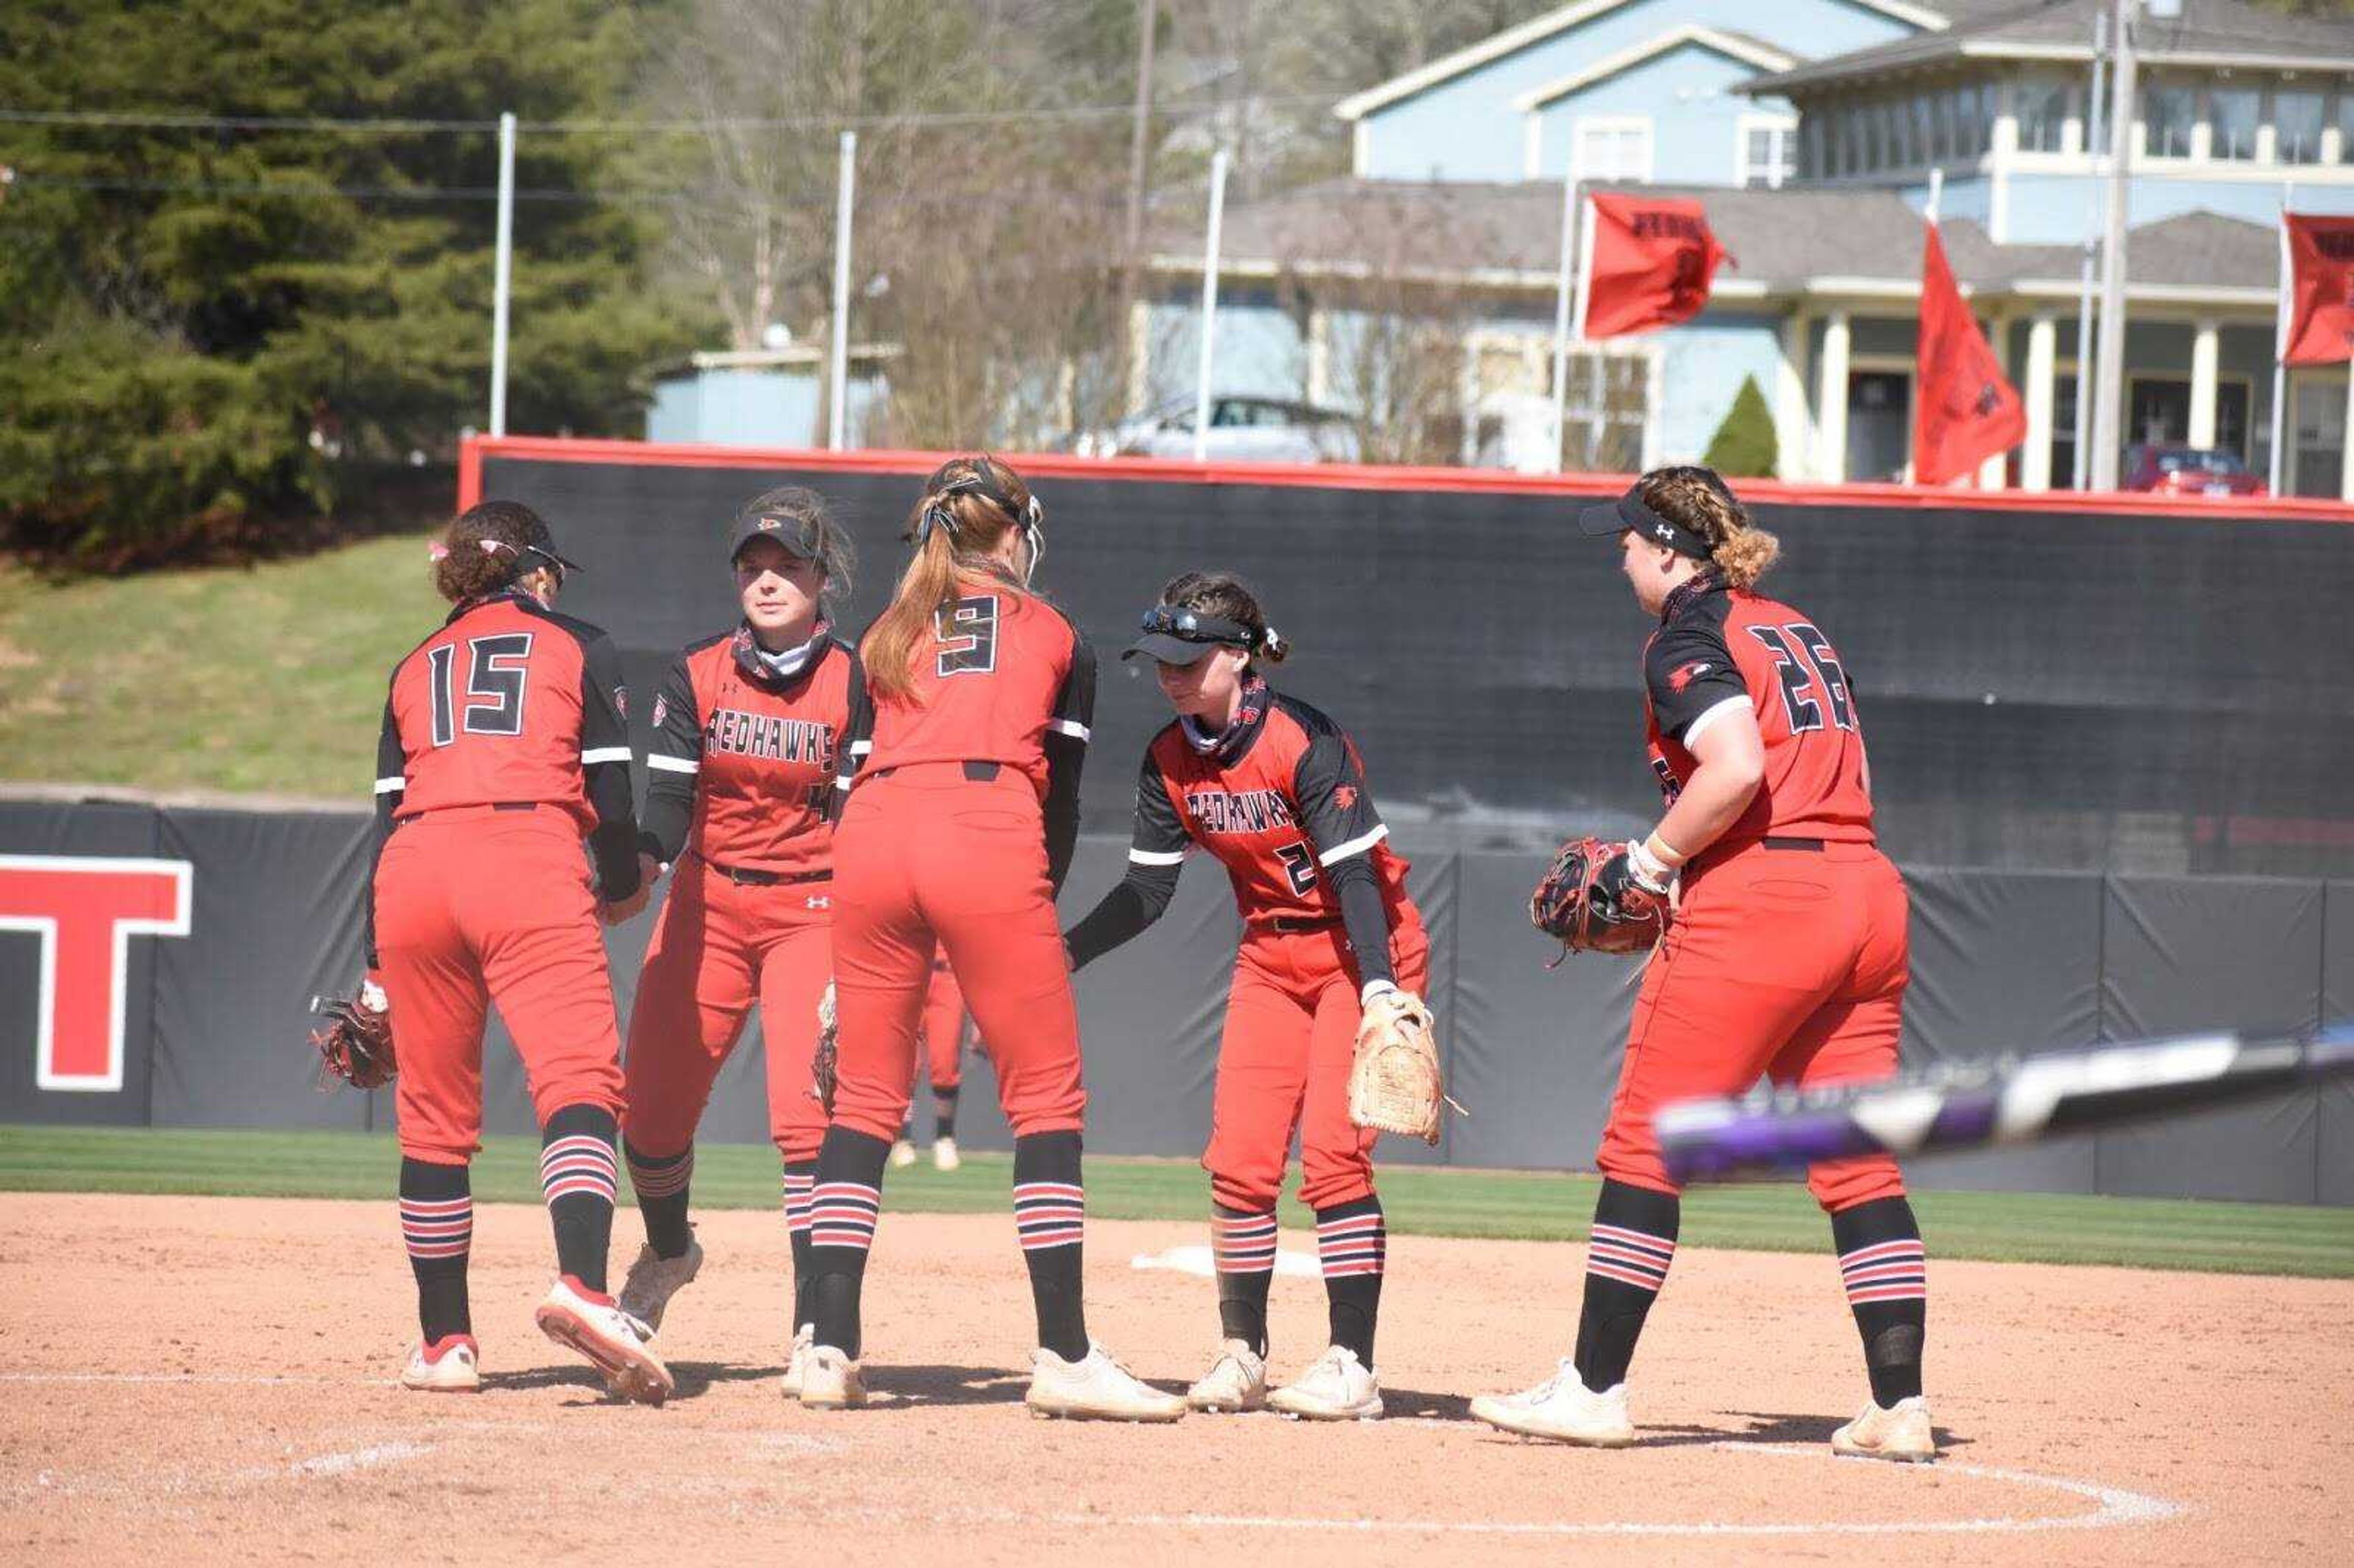 The Redhawks meet in the pitcher's circle prior to the start of an inning during a 5-0 win over Southern Illinois on March 31 at the Southeast Softball Complex in Cape Girardeau.